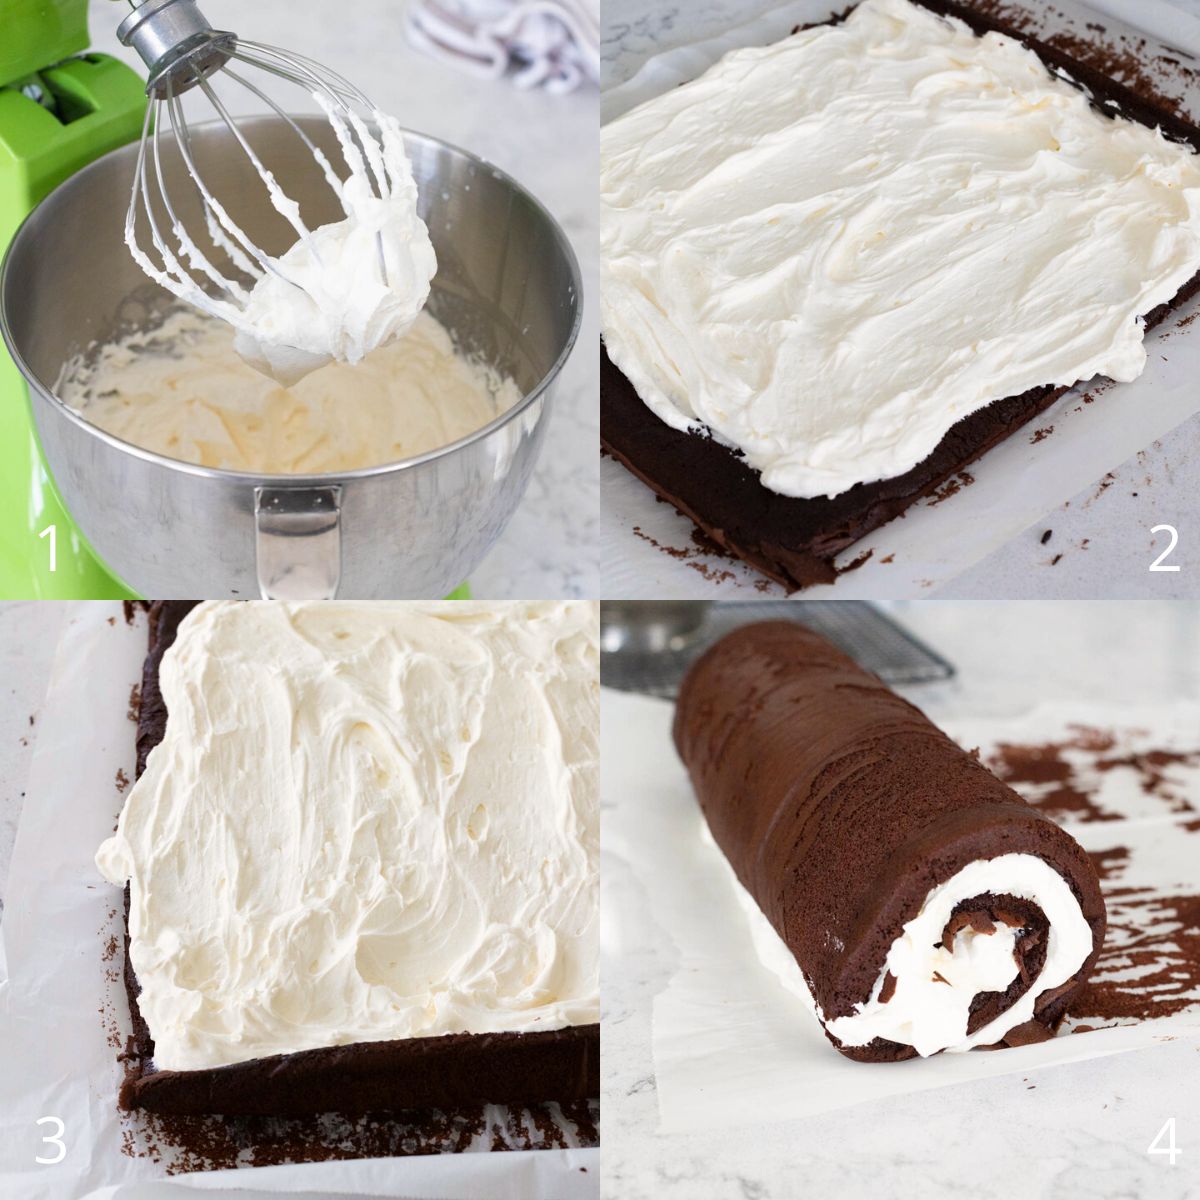 The step by step photos show how to make the cream filling and spread it into the cake roll.